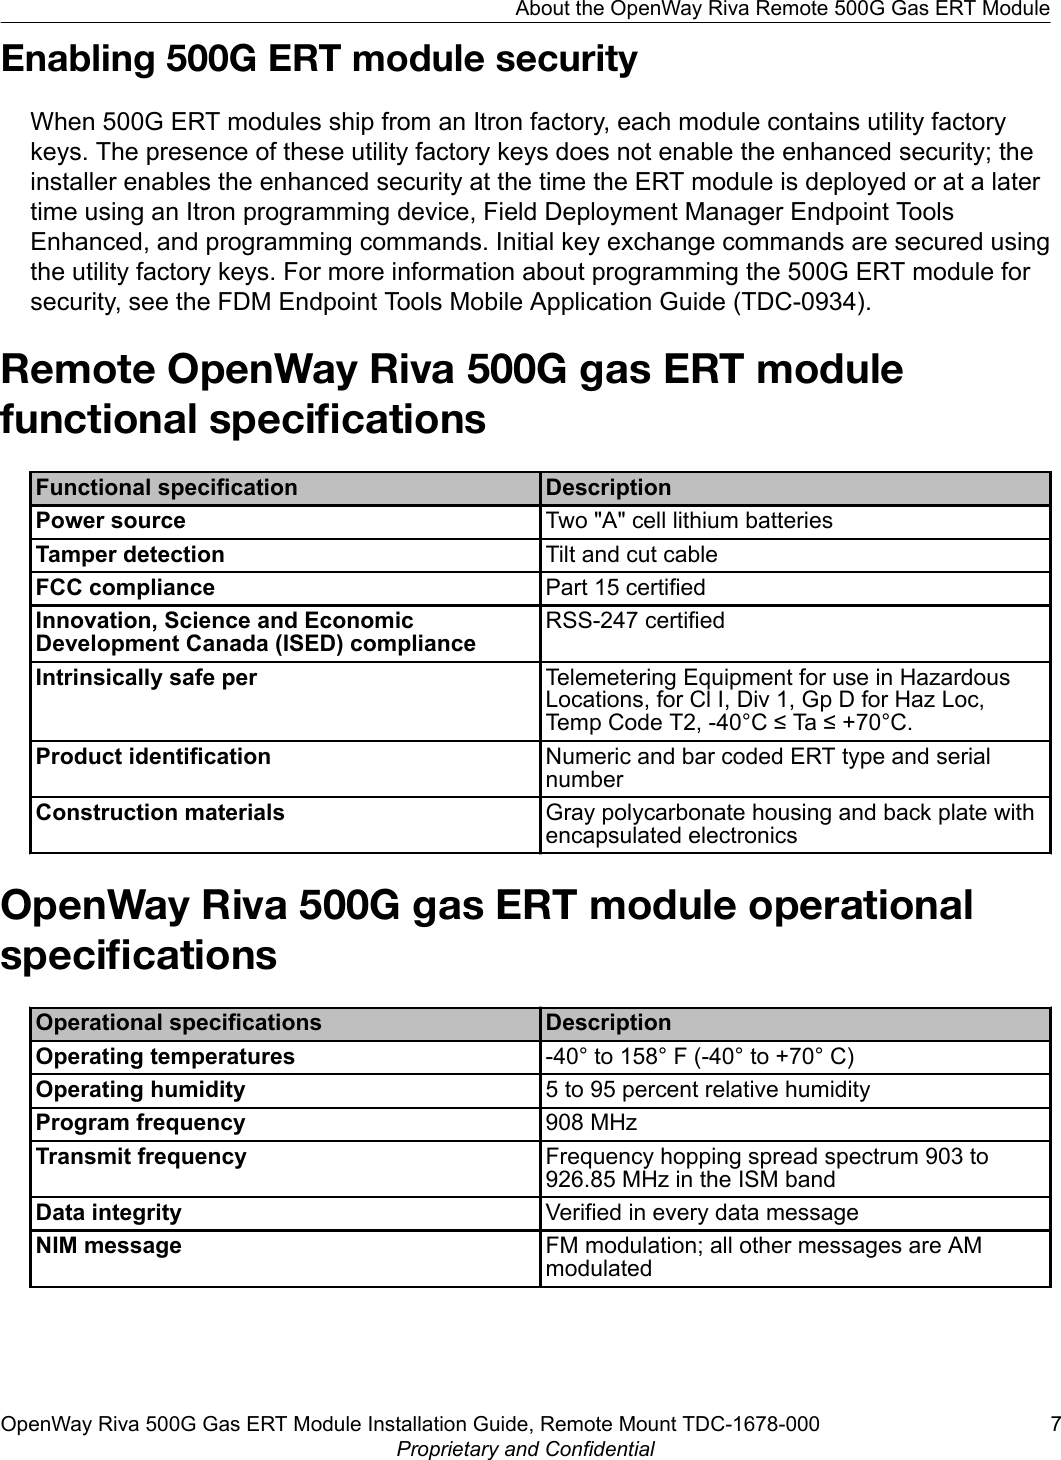 Enabling 500G ERT module securityWhen 500G ERT modules ship from an Itron factory, each module contains utility factorykeys. The presence of these utility factory keys does not enable the enhanced security; theinstaller enables the enhanced security at the time the ERT module is deployed or at a latertime using an Itron programming device, Field Deployment Manager Endpoint ToolsEnhanced, and programming commands. Initial key exchange commands are secured usingthe utility factory keys. For more information about programming the 500G ERT module forsecurity, see the FDM Endpoint Tools Mobile Application Guide (TDC-0934).Remote OpenWay Riva 500G gas ERT modulefunctional speciﬁcationsFunctional specification DescriptionPower source Two &quot;A&quot; cell lithium batteriesTamper detection Tilt and cut cableFCC compliance Part 15 certifiedInnovation, Science and EconomicDevelopment Canada (ISED) complianceRSS-247 certifiedIntrinsically safe per Telemetering Equipment for use in HazardousLocations, for Cl I, Div 1, Gp D for Haz Loc,Temp Code T2, -40°C ≤ Ta ≤ +70°C.Product identification Numeric and bar coded ERT type and serialnumberConstruction materials Gray polycarbonate housing and back plate withencapsulated electronicsOpenWay Riva 500G gas ERT module operationalspeciﬁcationsOperational specifications DescriptionOperating temperatures -40° to 158° F (-40° to +70° C)Operating humidity 5 to 95 percent relative humidityProgram frequency 908 MHzTransmit frequency Frequency hopping spread spectrum 903 to926.85 MHz in the ISM bandData integrity Verified in every data messageNIM message FM modulation; all other messages are AMmodulatedAbout the OpenWay Riva Remote 500G Gas ERT ModuleOpenWay Riva 500G Gas ERT Module Installation Guide, Remote Mount TDC-1678-000 7Proprietary and Confidential